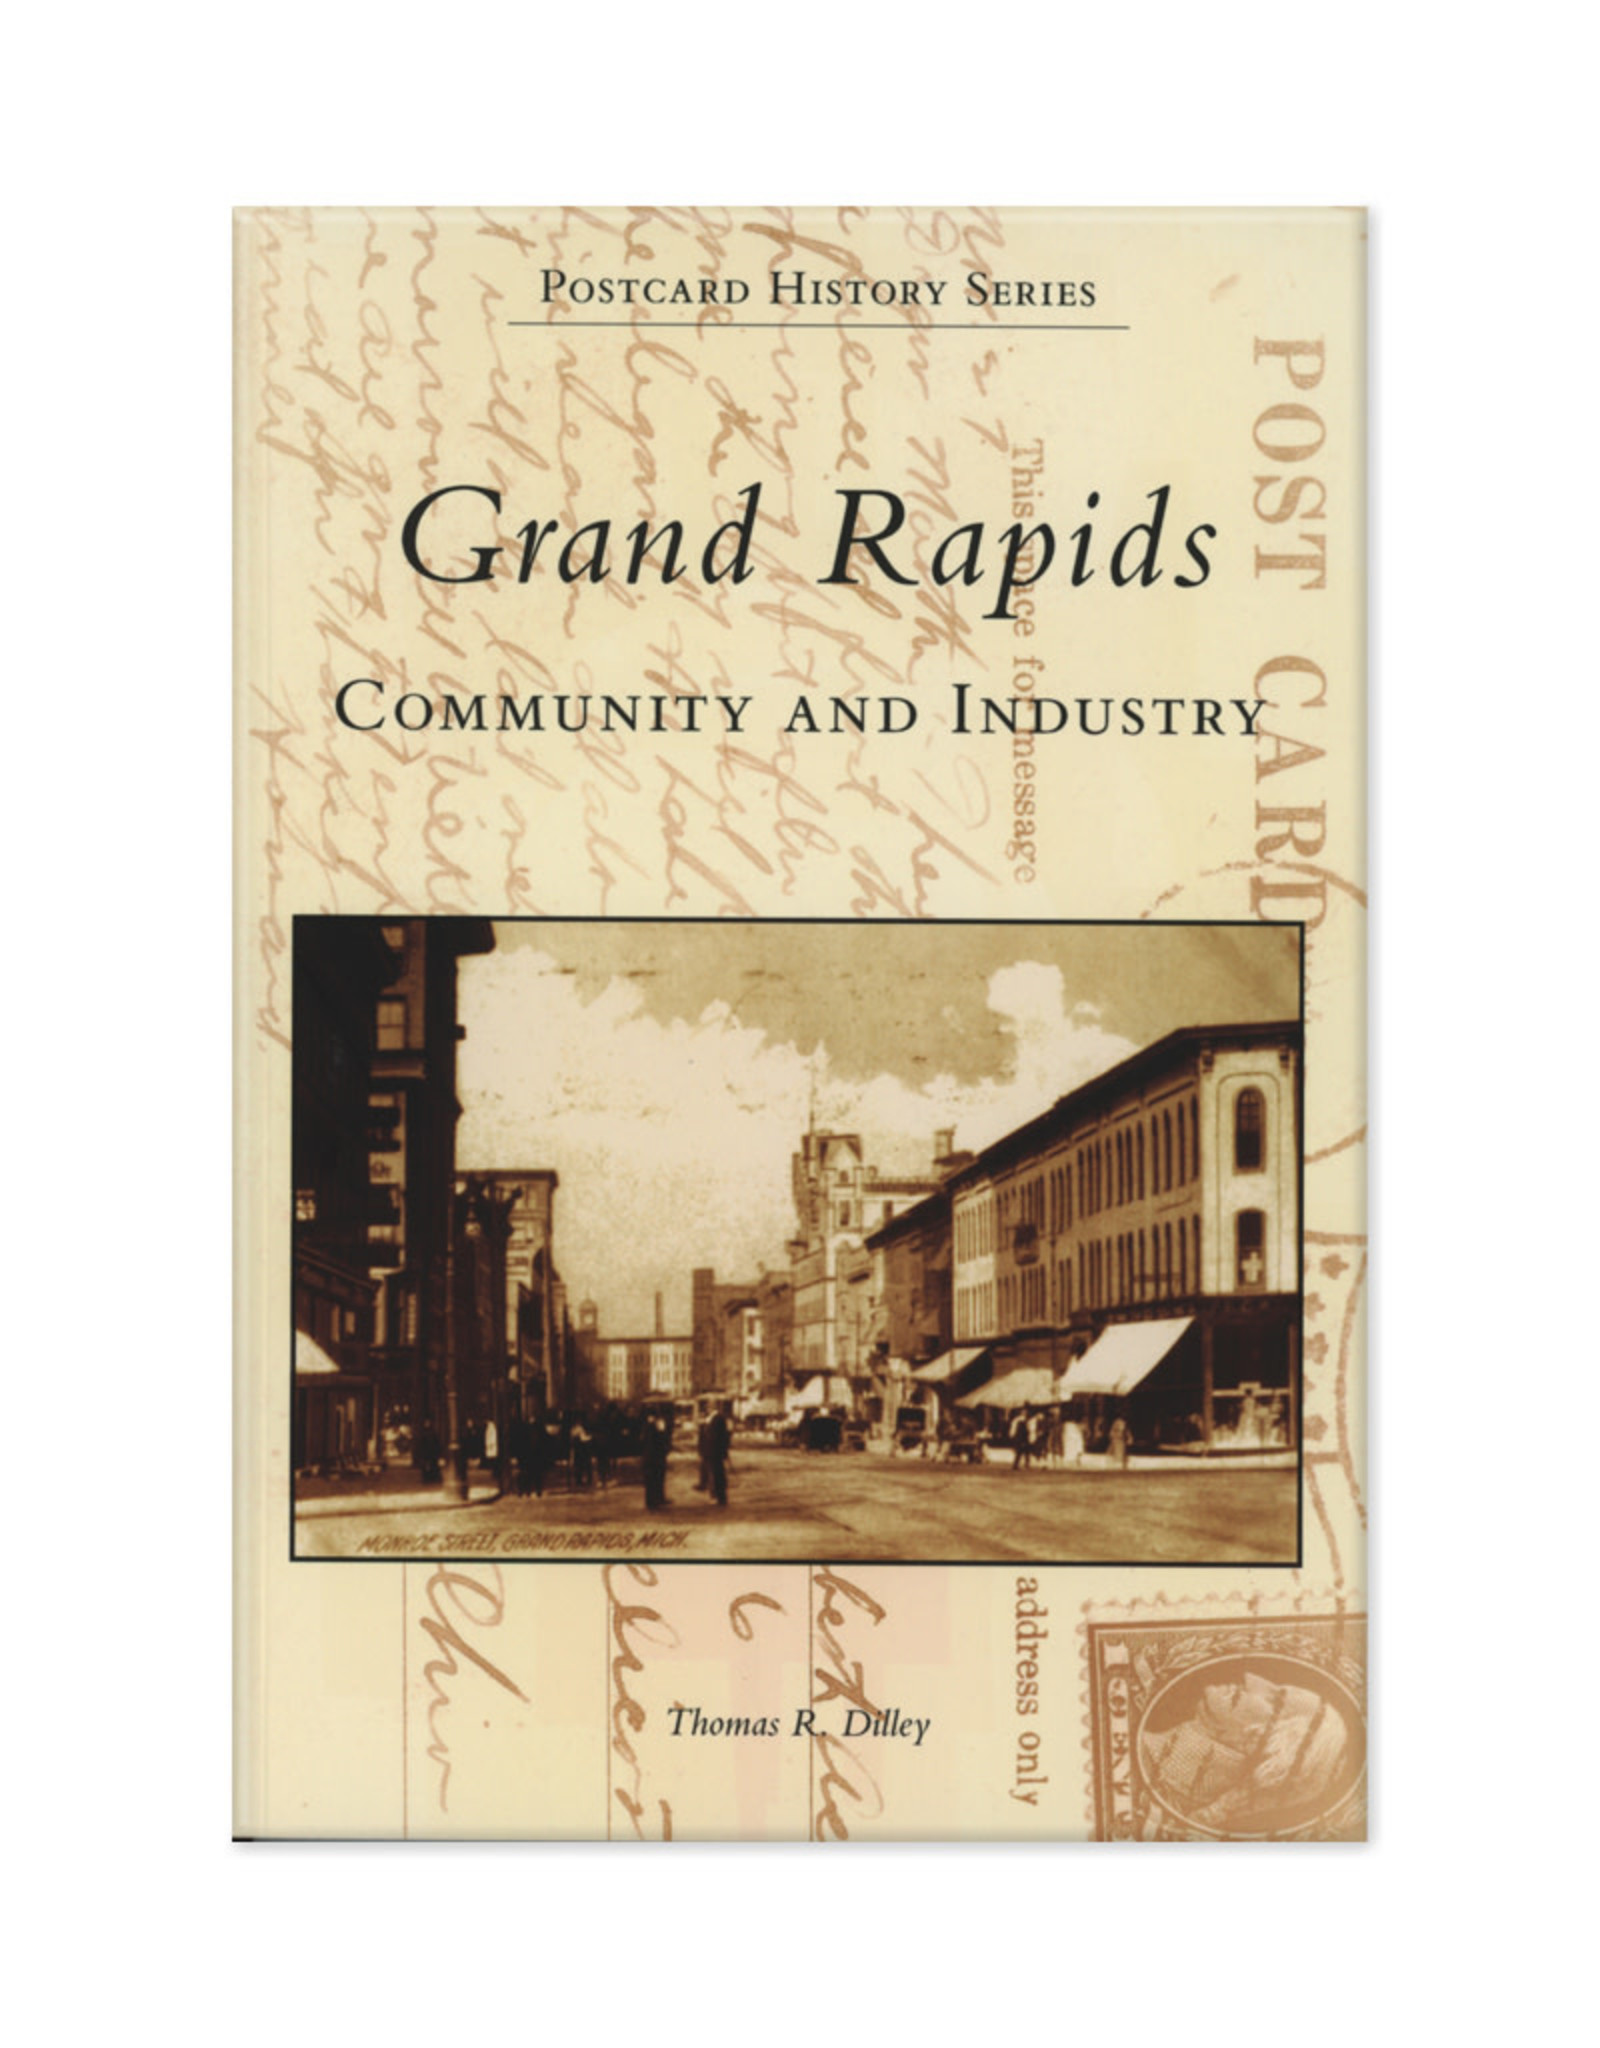 Grand Rapids Community and Industry